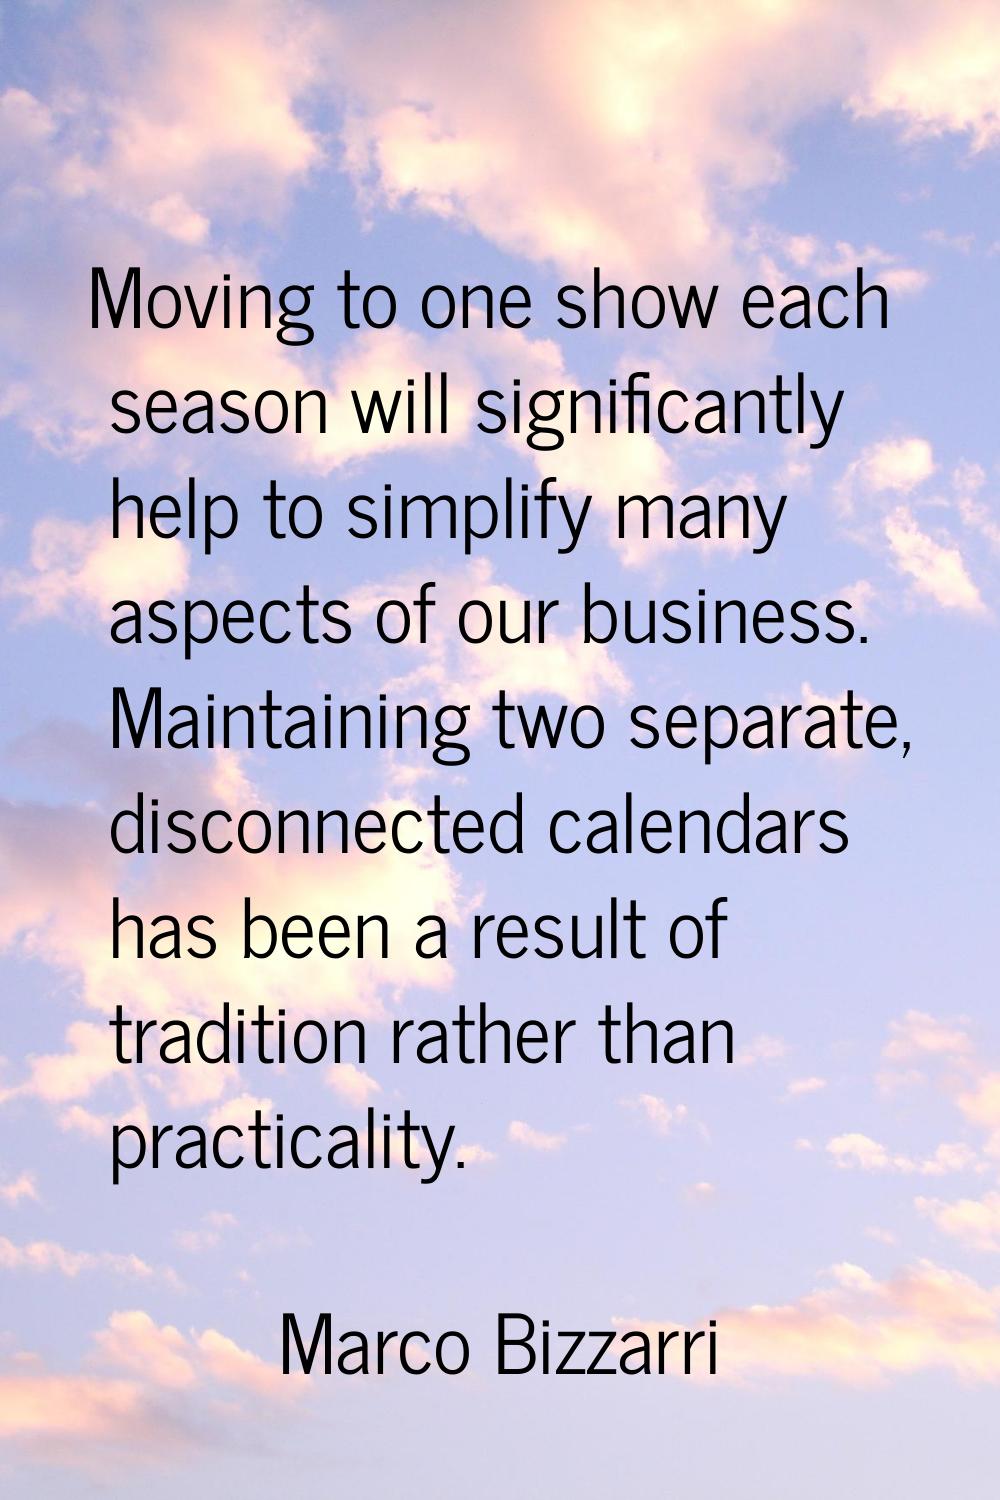 Moving to one show each season will significantly help to simplify many aspects of our business. Ma